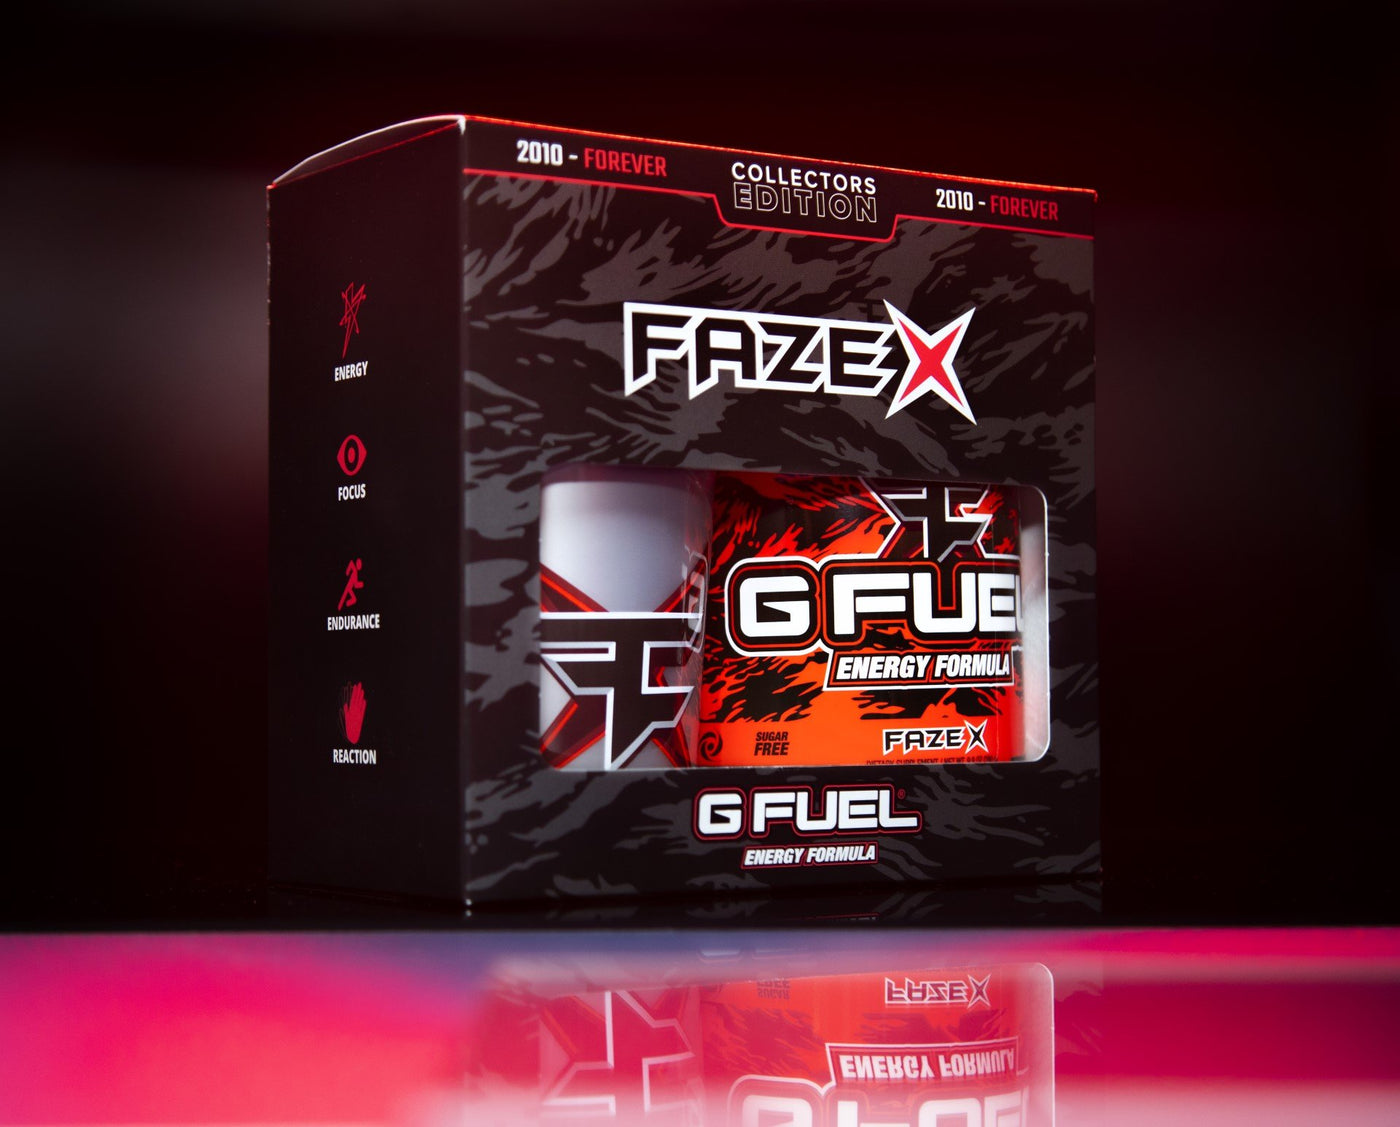 A G FUEL FaZe X collectors box includes one 40-serving FaZe X tub and one 16 oz shaker cup.